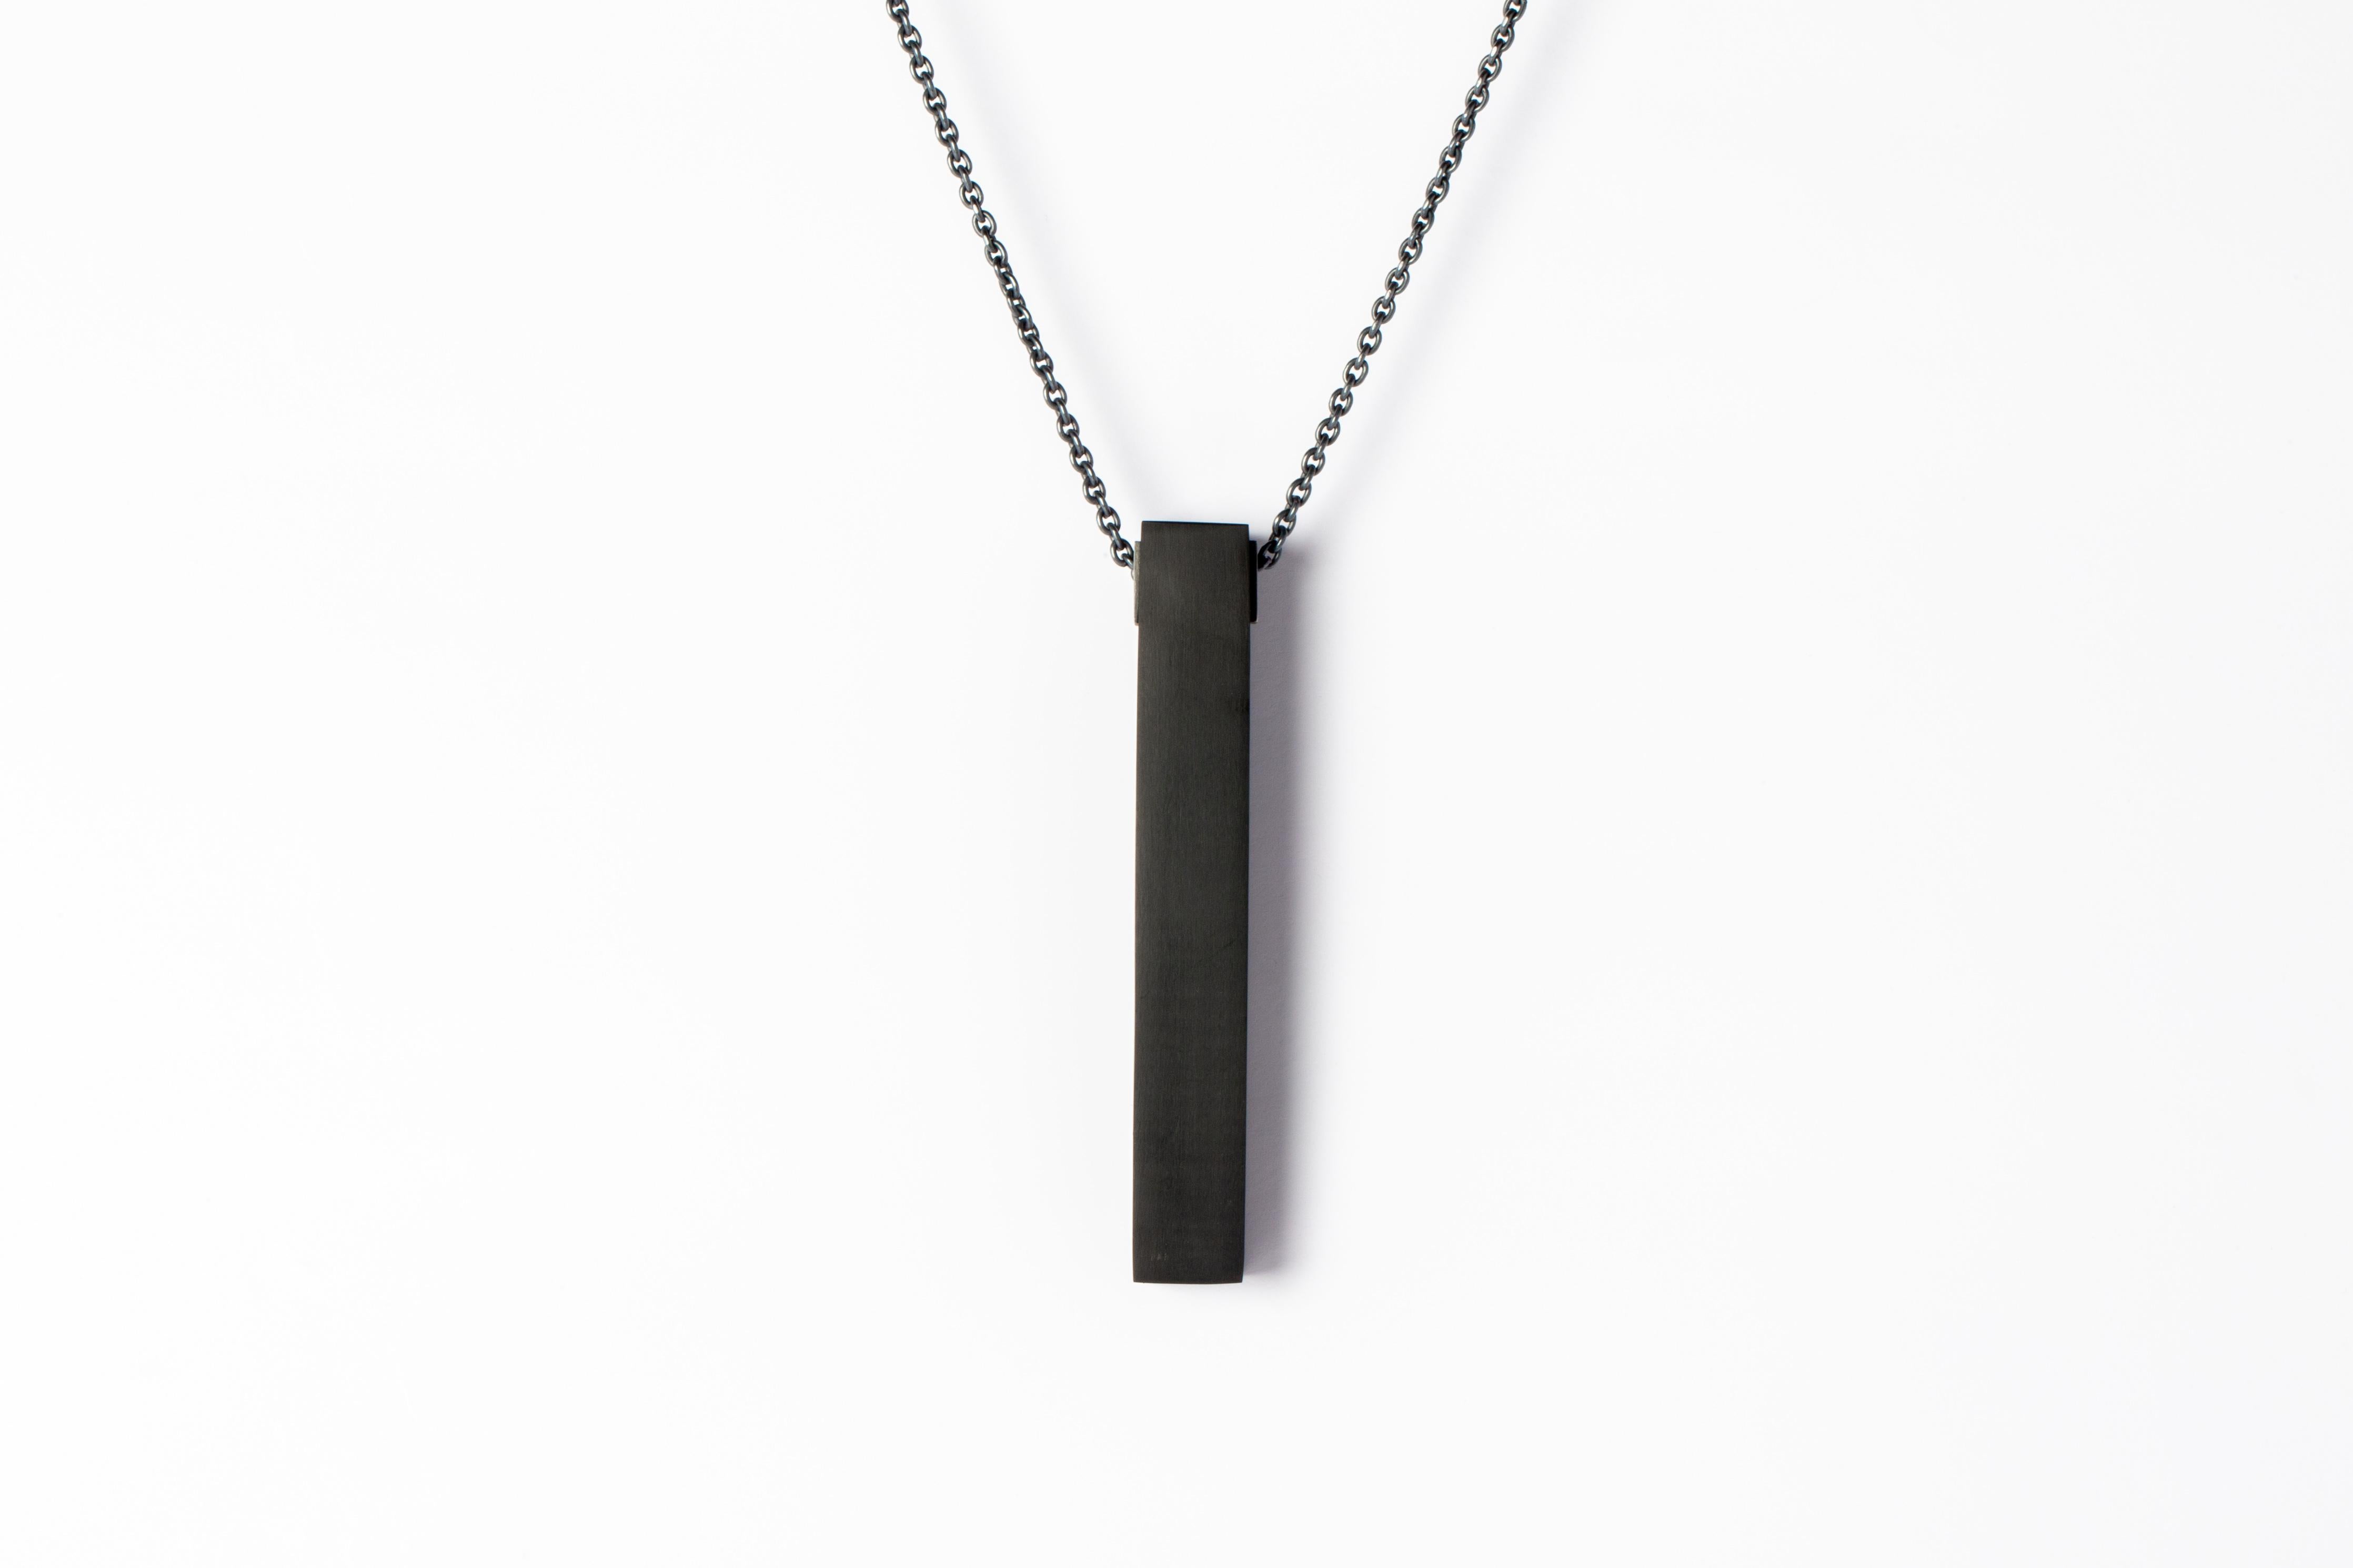 Pendant necklace in the shape of cuboid in JET, it comes on a 74cm sterling silver chain. This oxydized finish may fade over time, which can be considered an enhancement. Please note that Black Sterling tends to appear darker in photograph than in